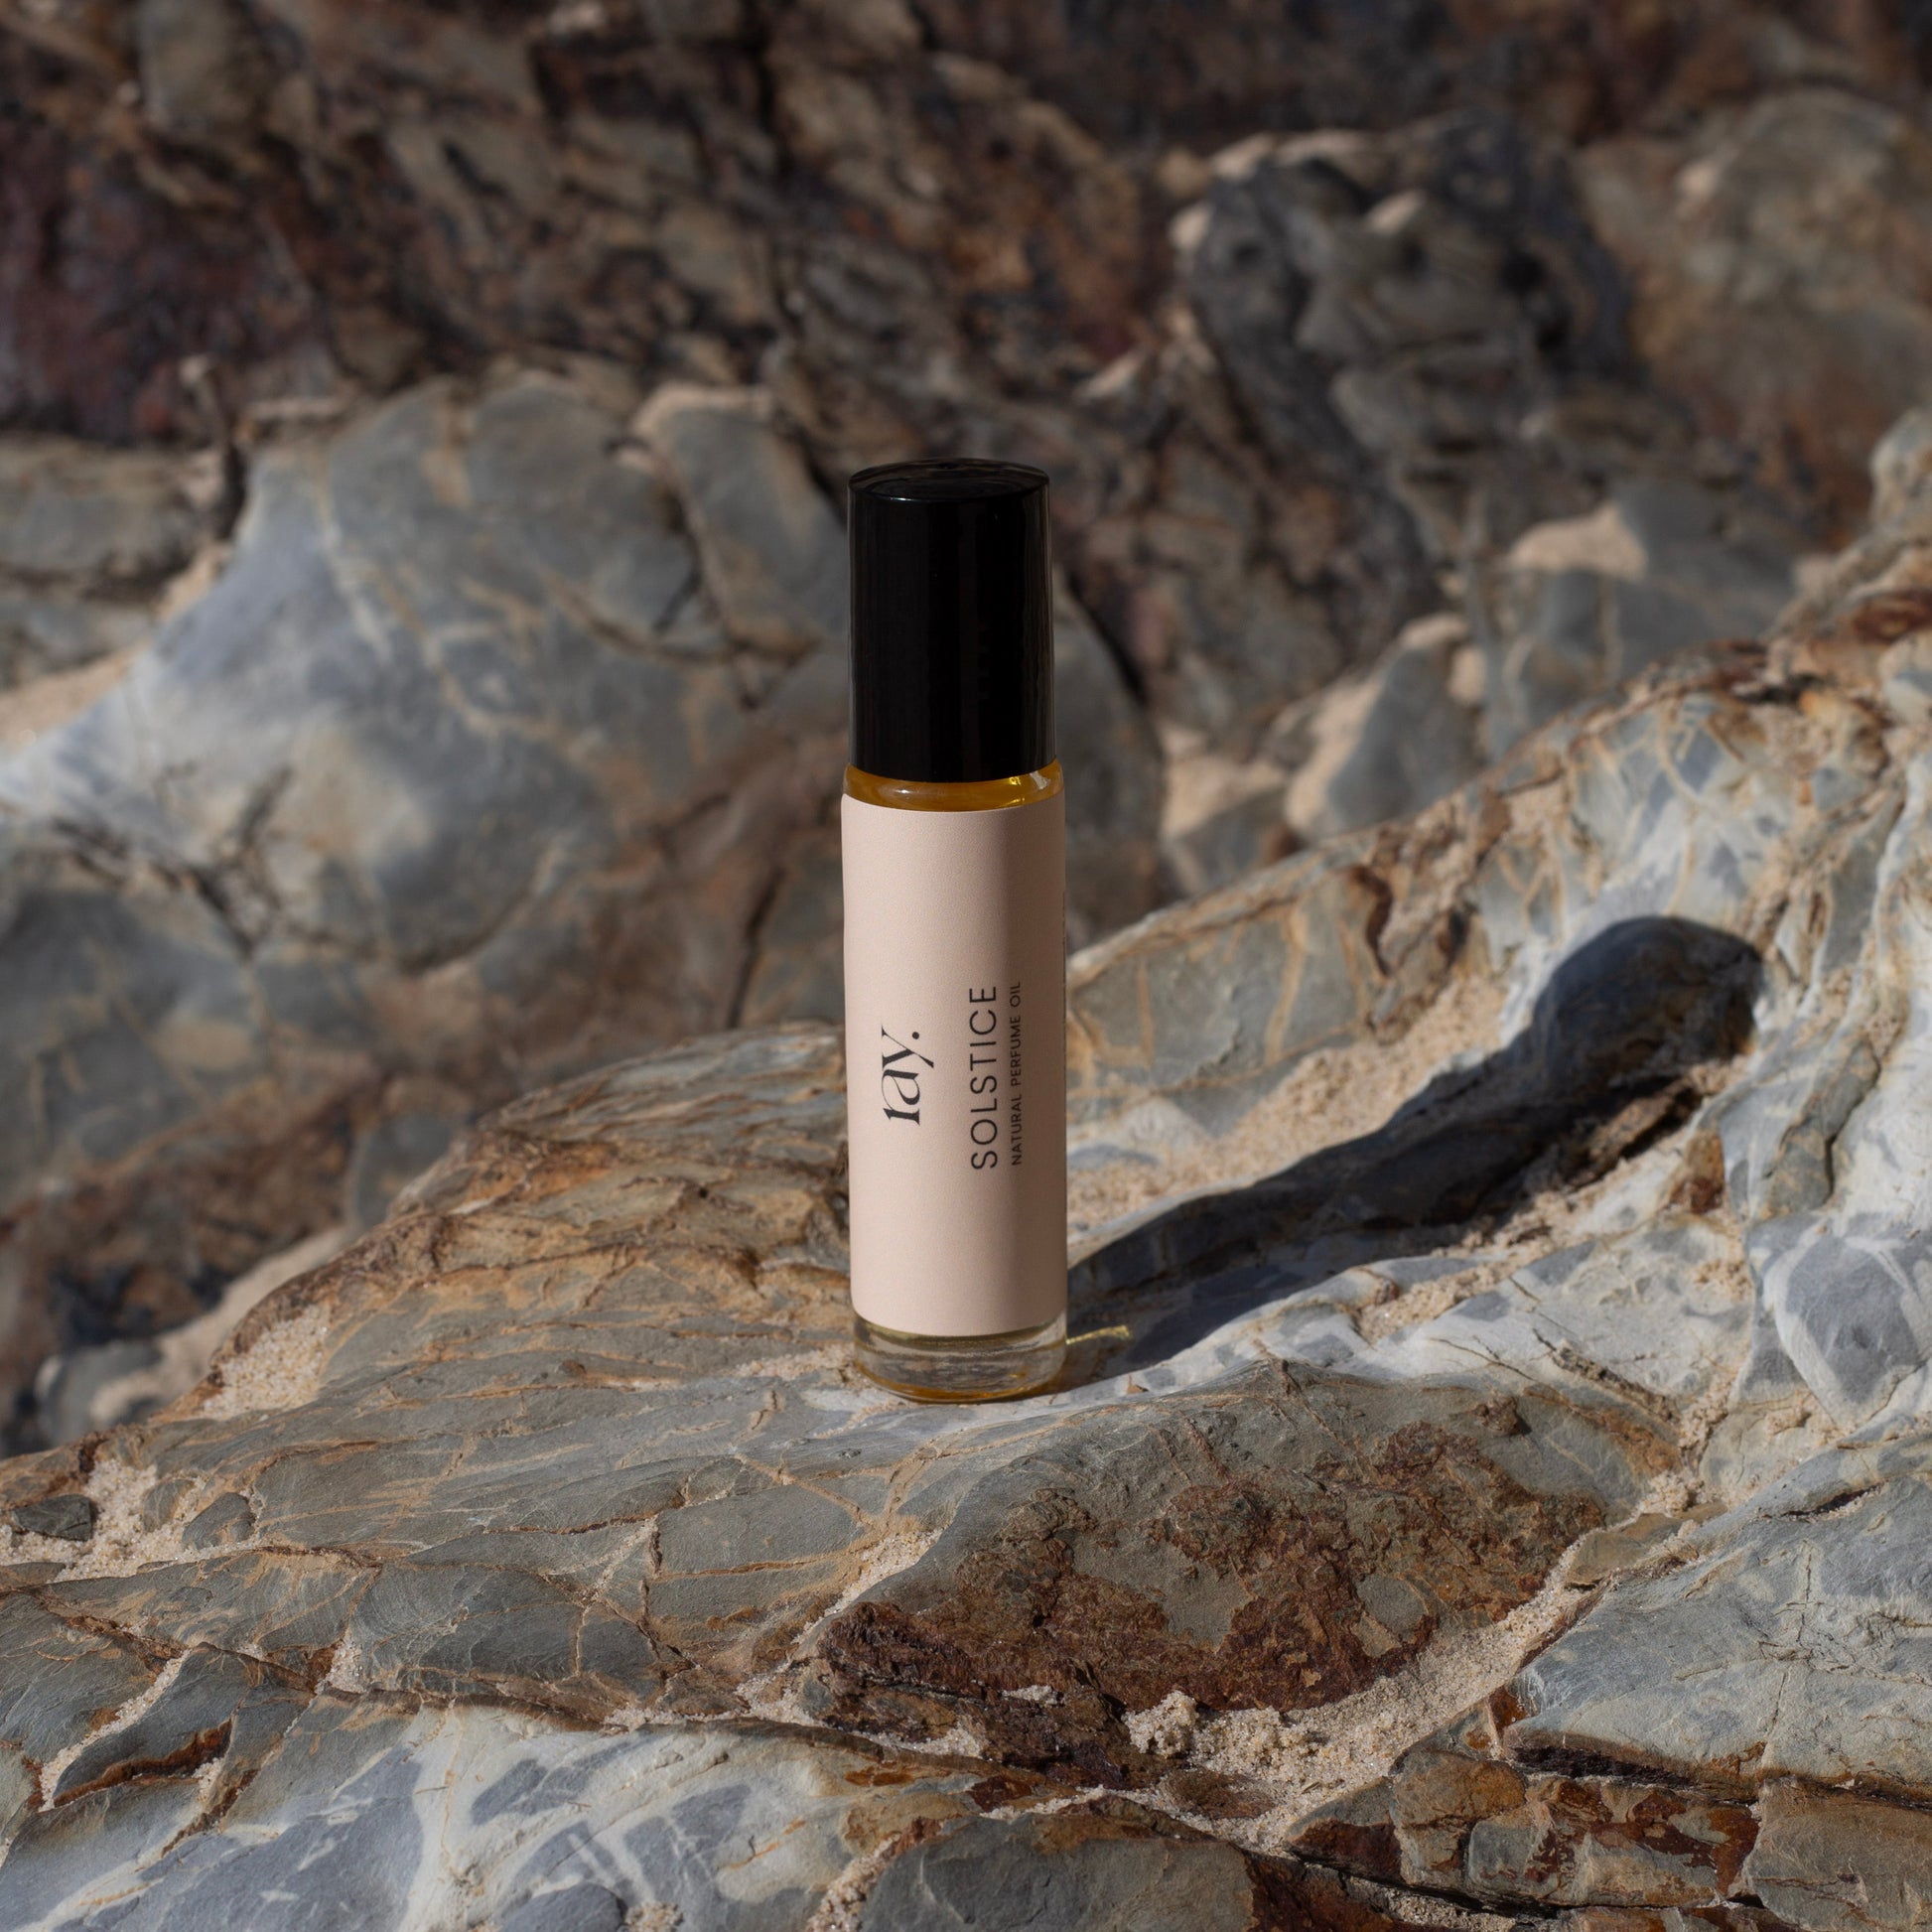 Travel size perfume roll-on oil standing on rock face at the beach